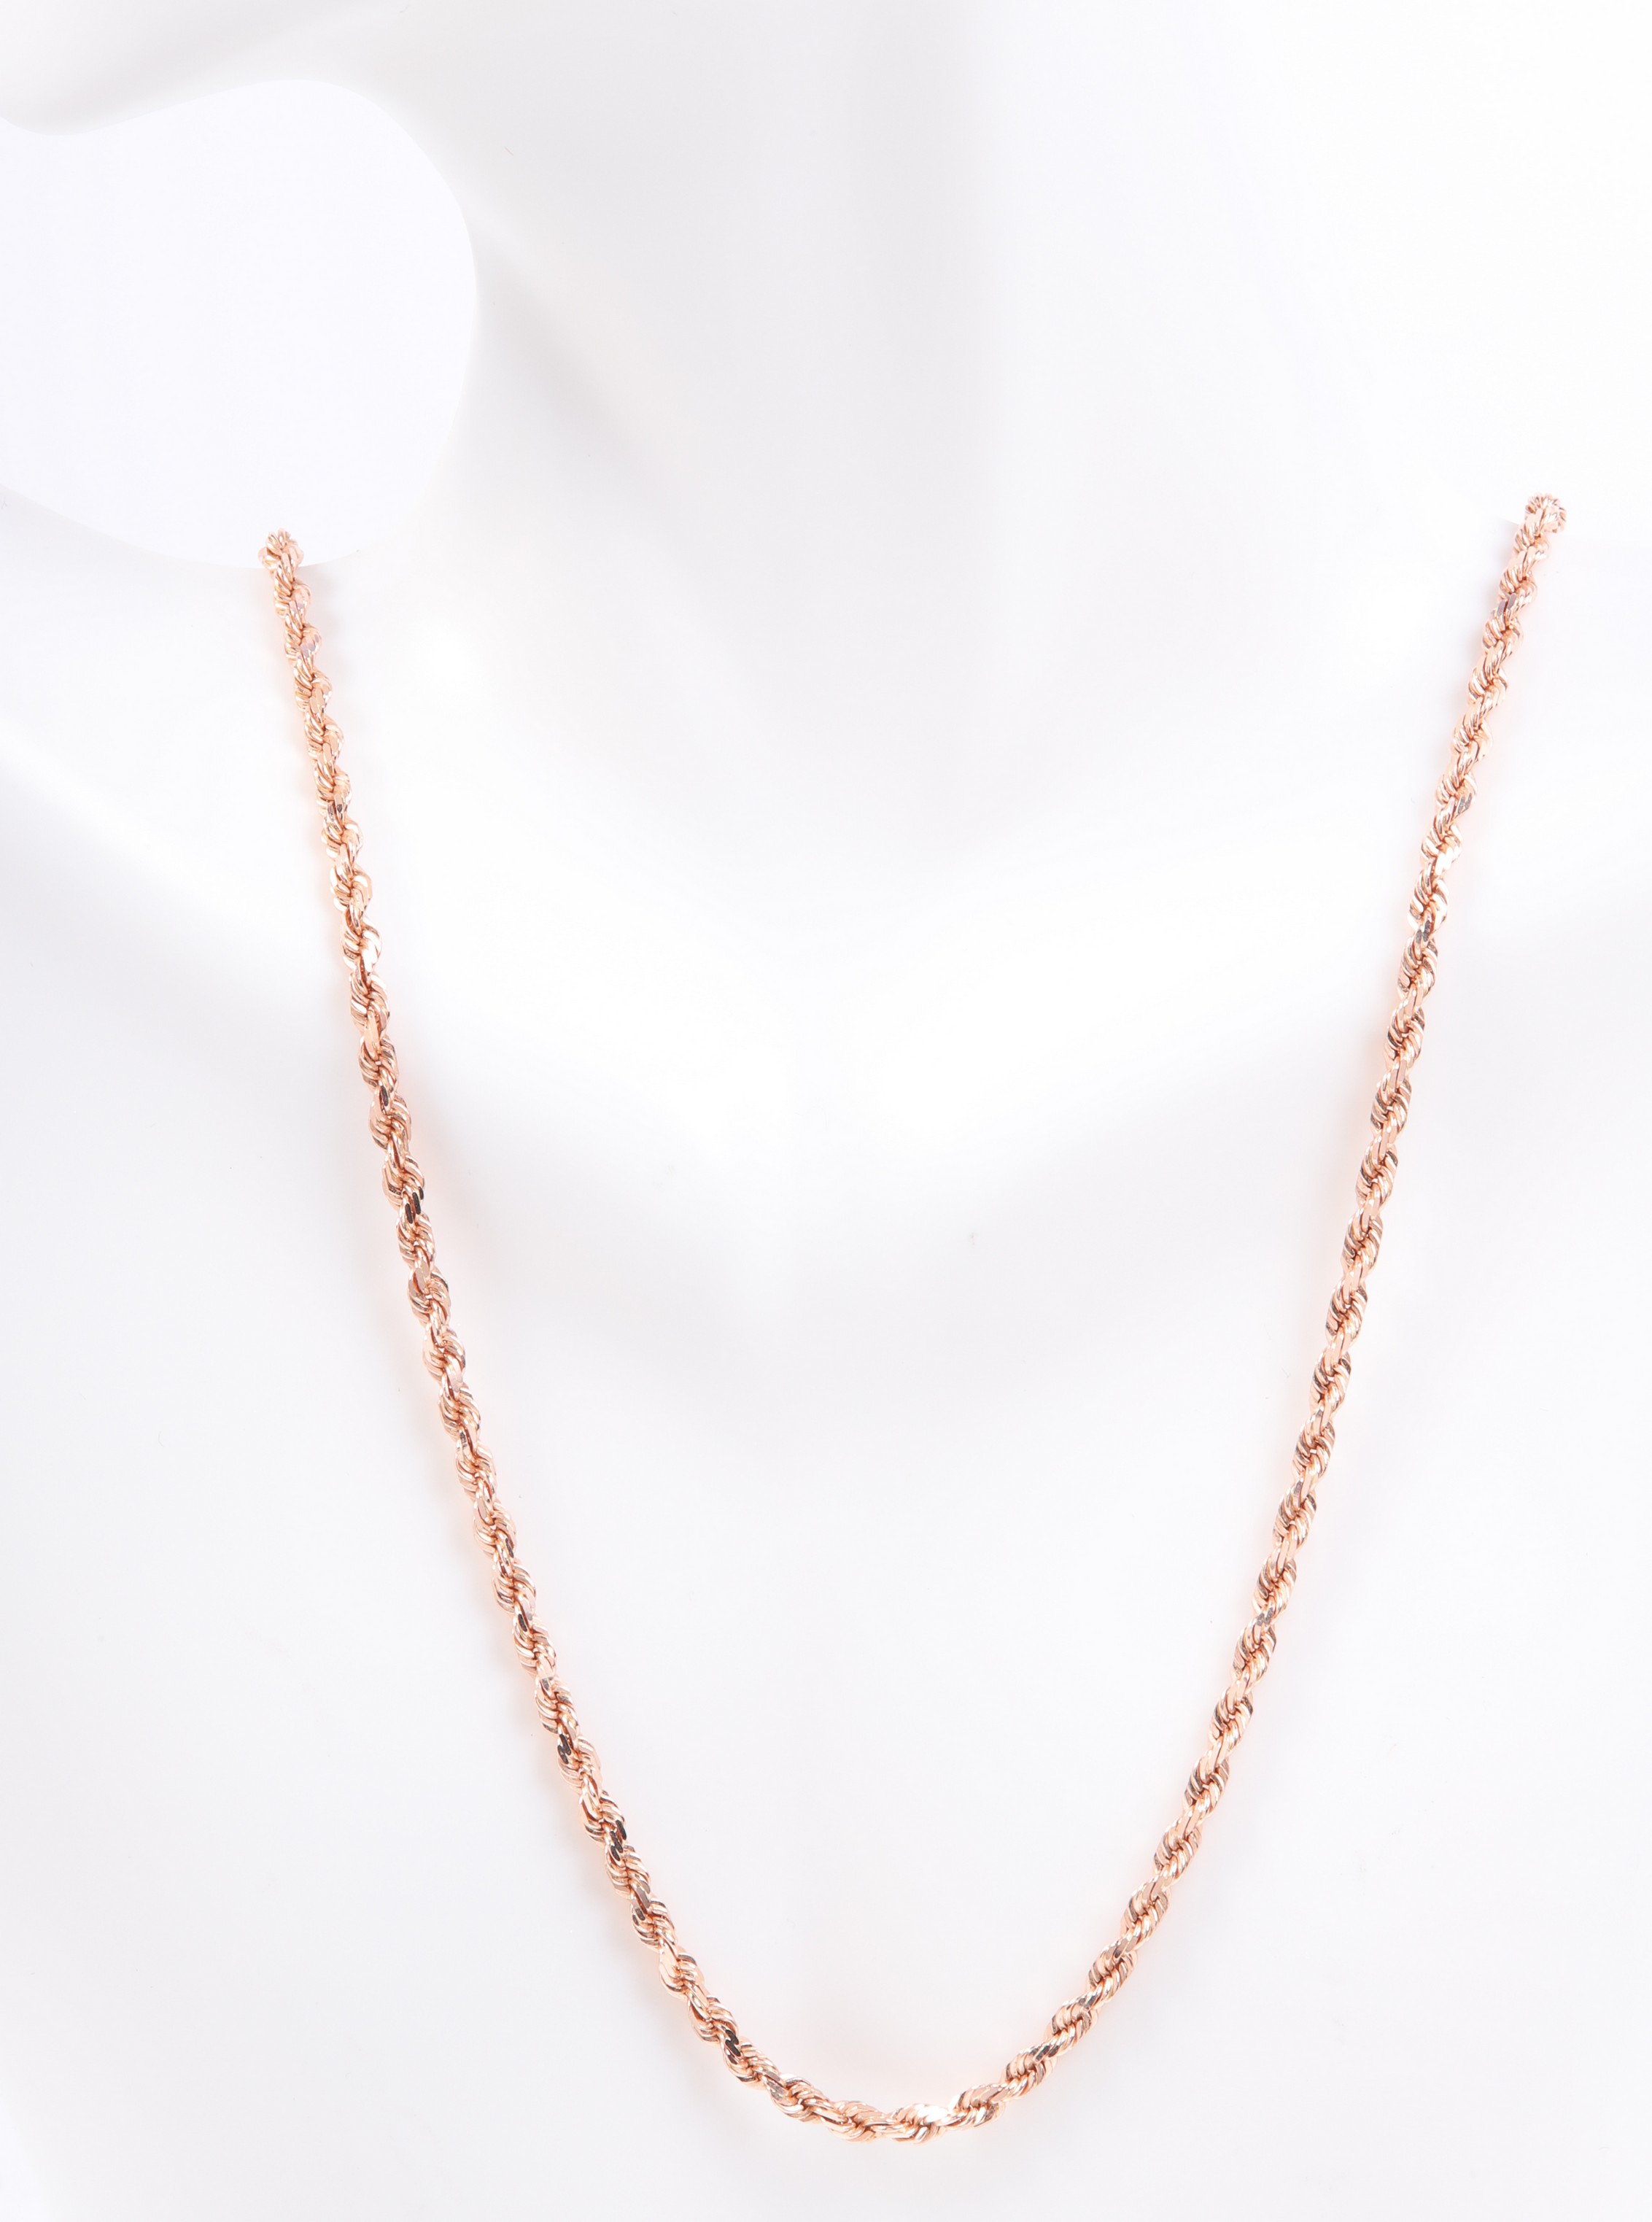 14K Rose gold rope chain necklace, 20L,